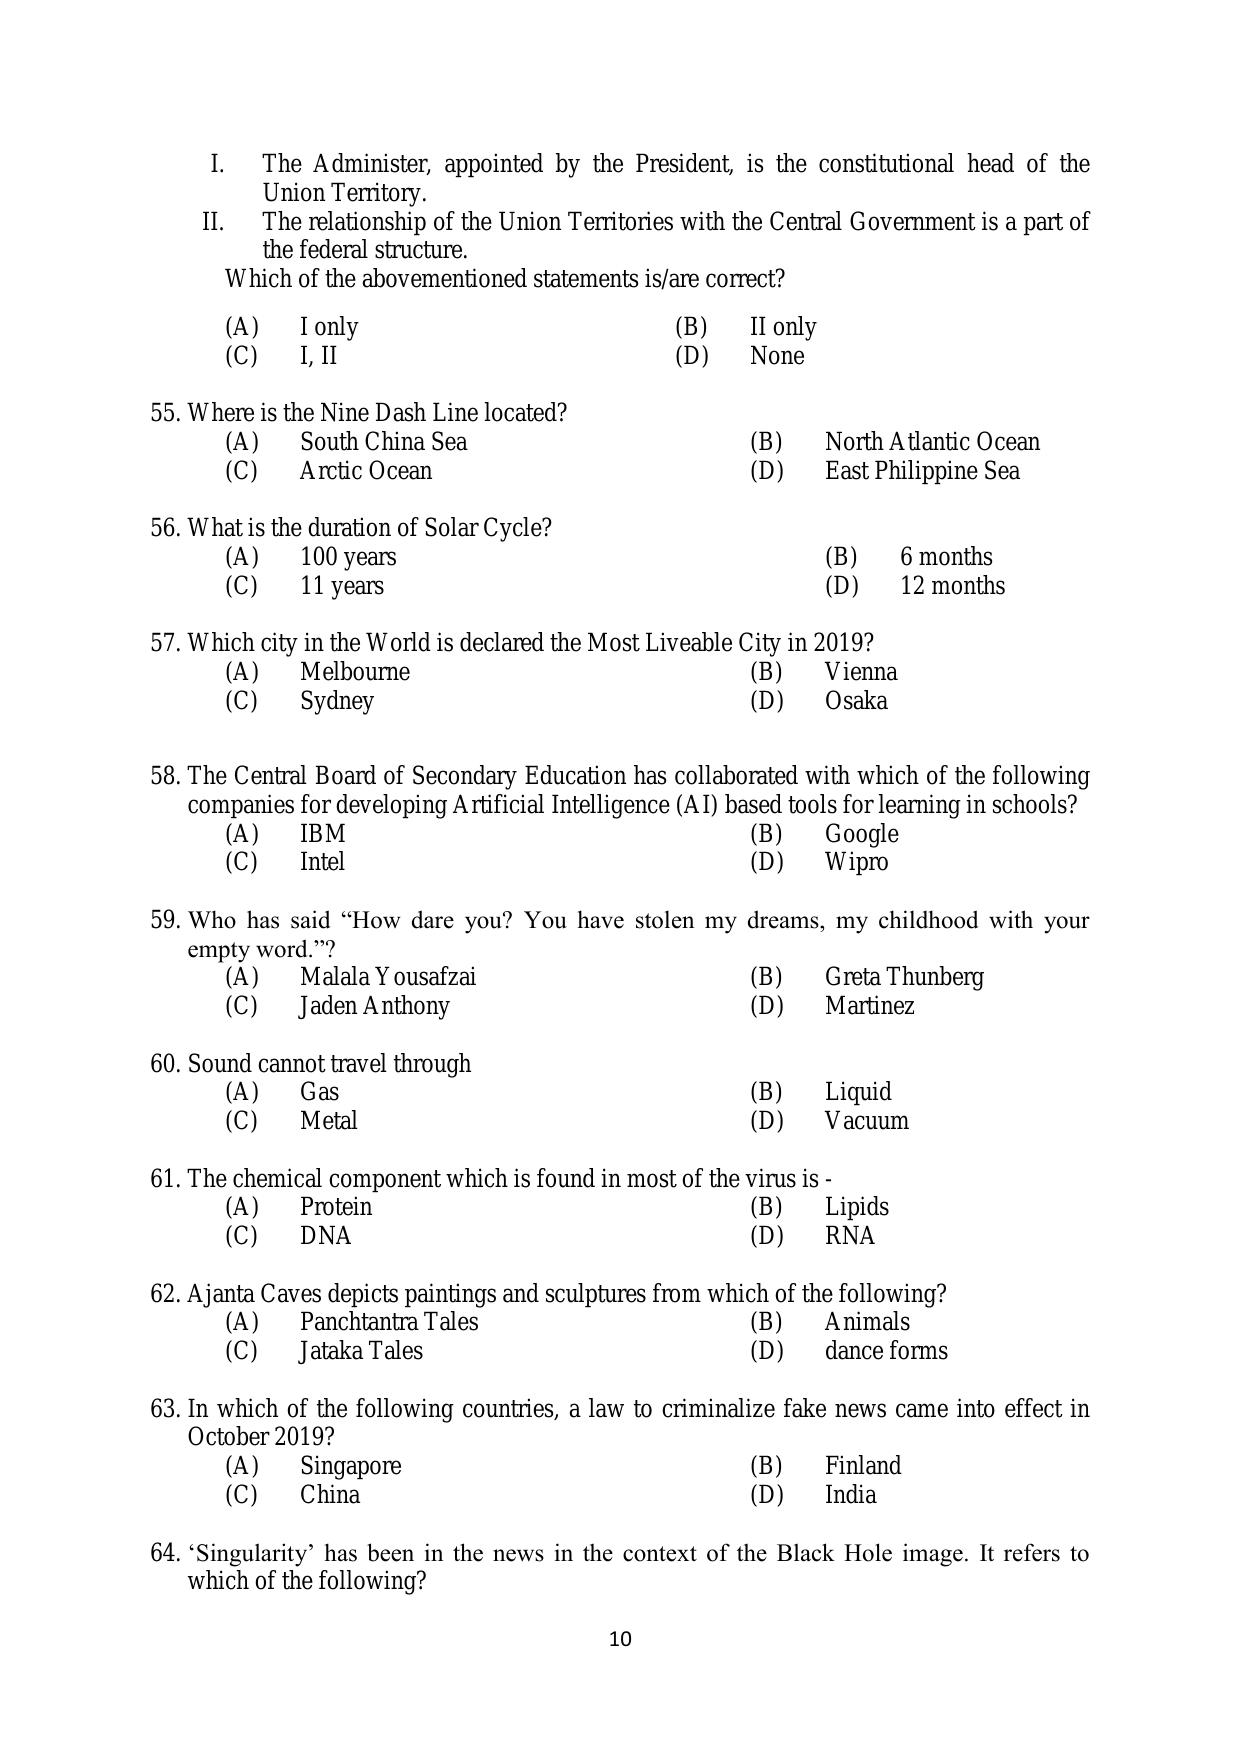 AILET 2020 Question Paper for BA LLB - Page 10